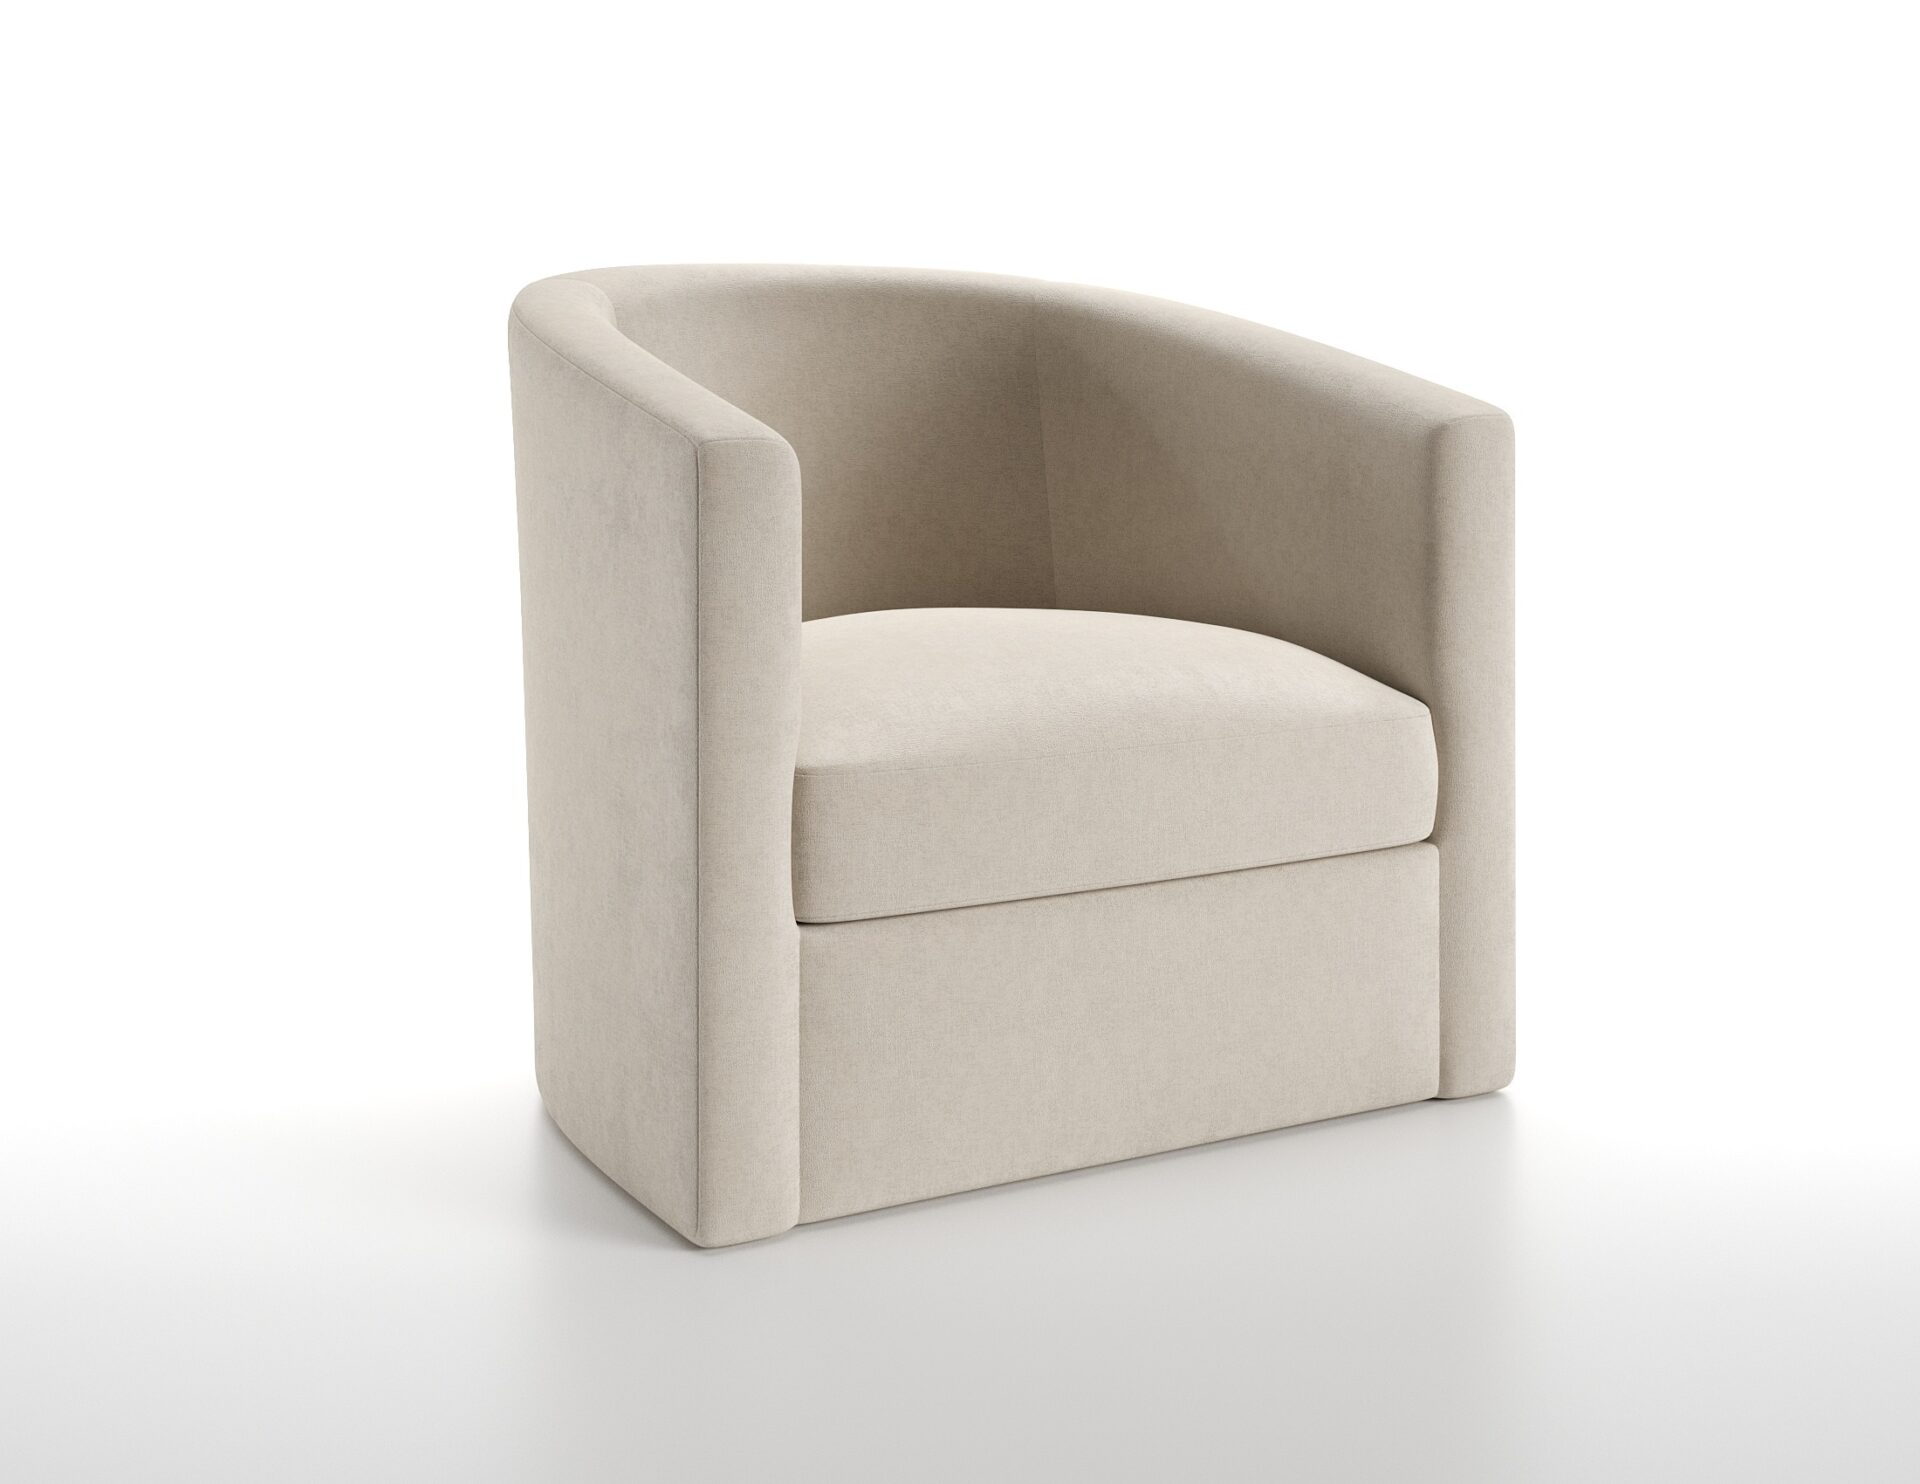 DANTE-upholstered-chair-luxury-furniture-blend-home-furnishings